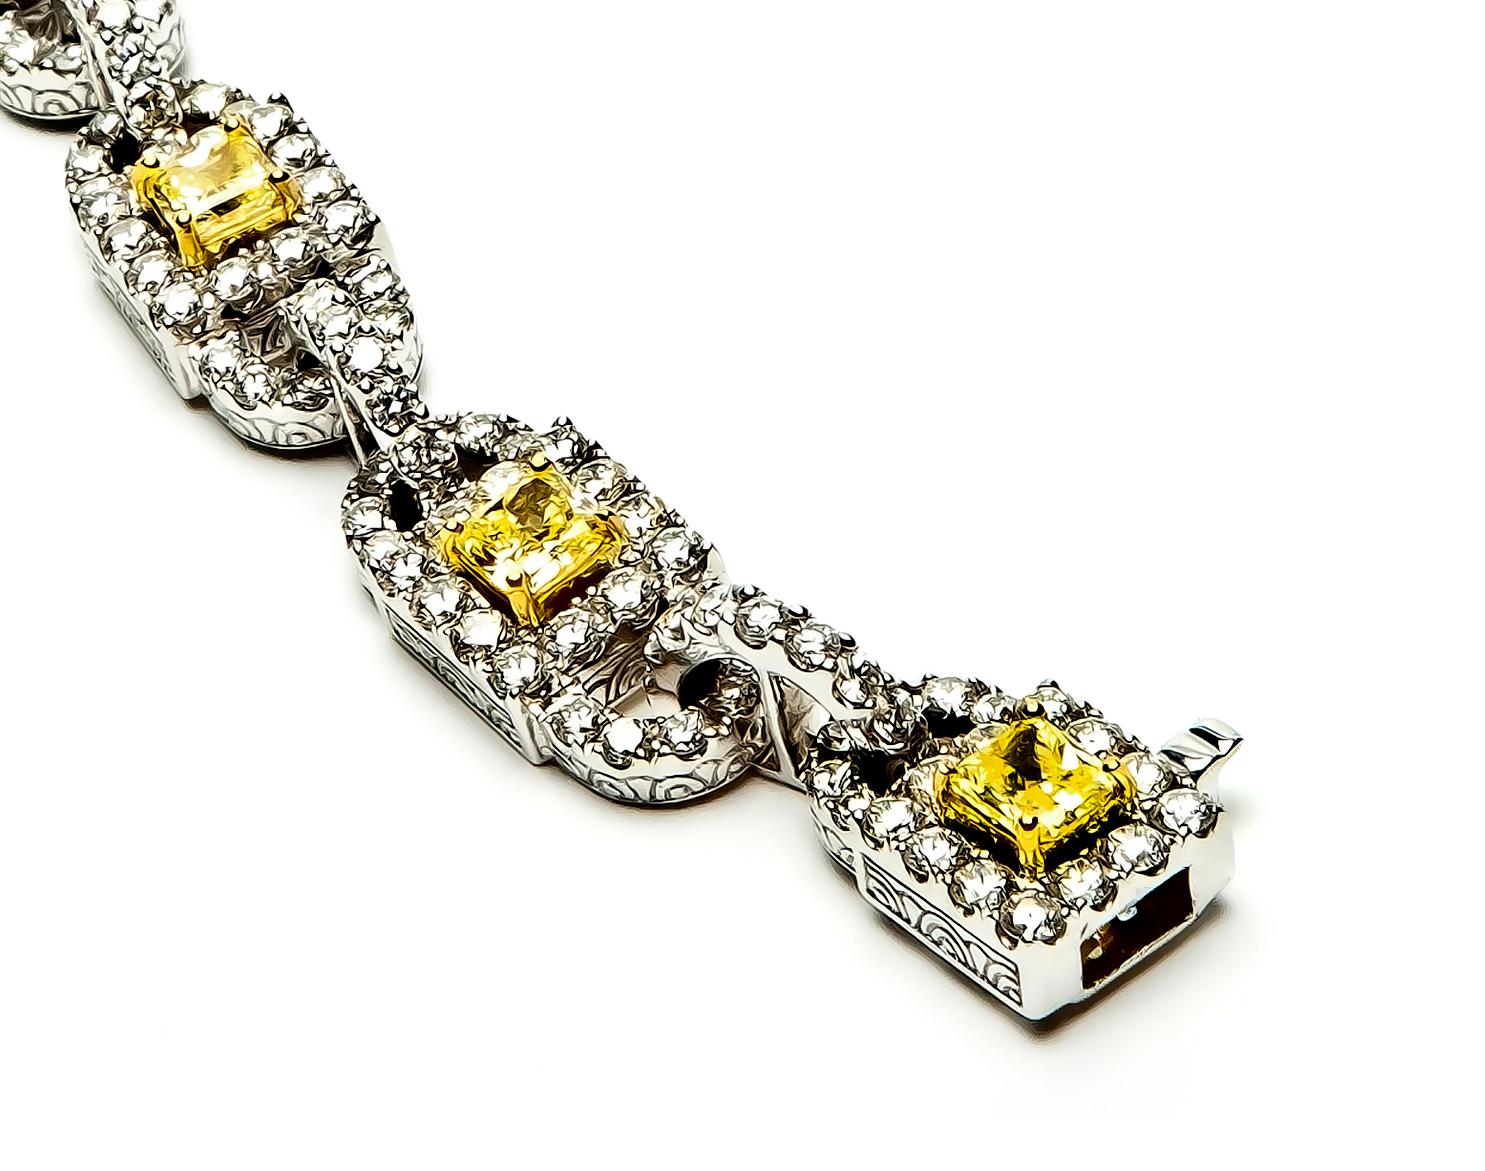 Marvel at an 18 karat White Gold link bracelet, designed by world-renowned jewelry designer, Danuta, which is set with eight individual princess cut Fancy Intense Yellow/VS1 Diamonds, each approximately .50 carats or totaling 4.0 carats and adorned